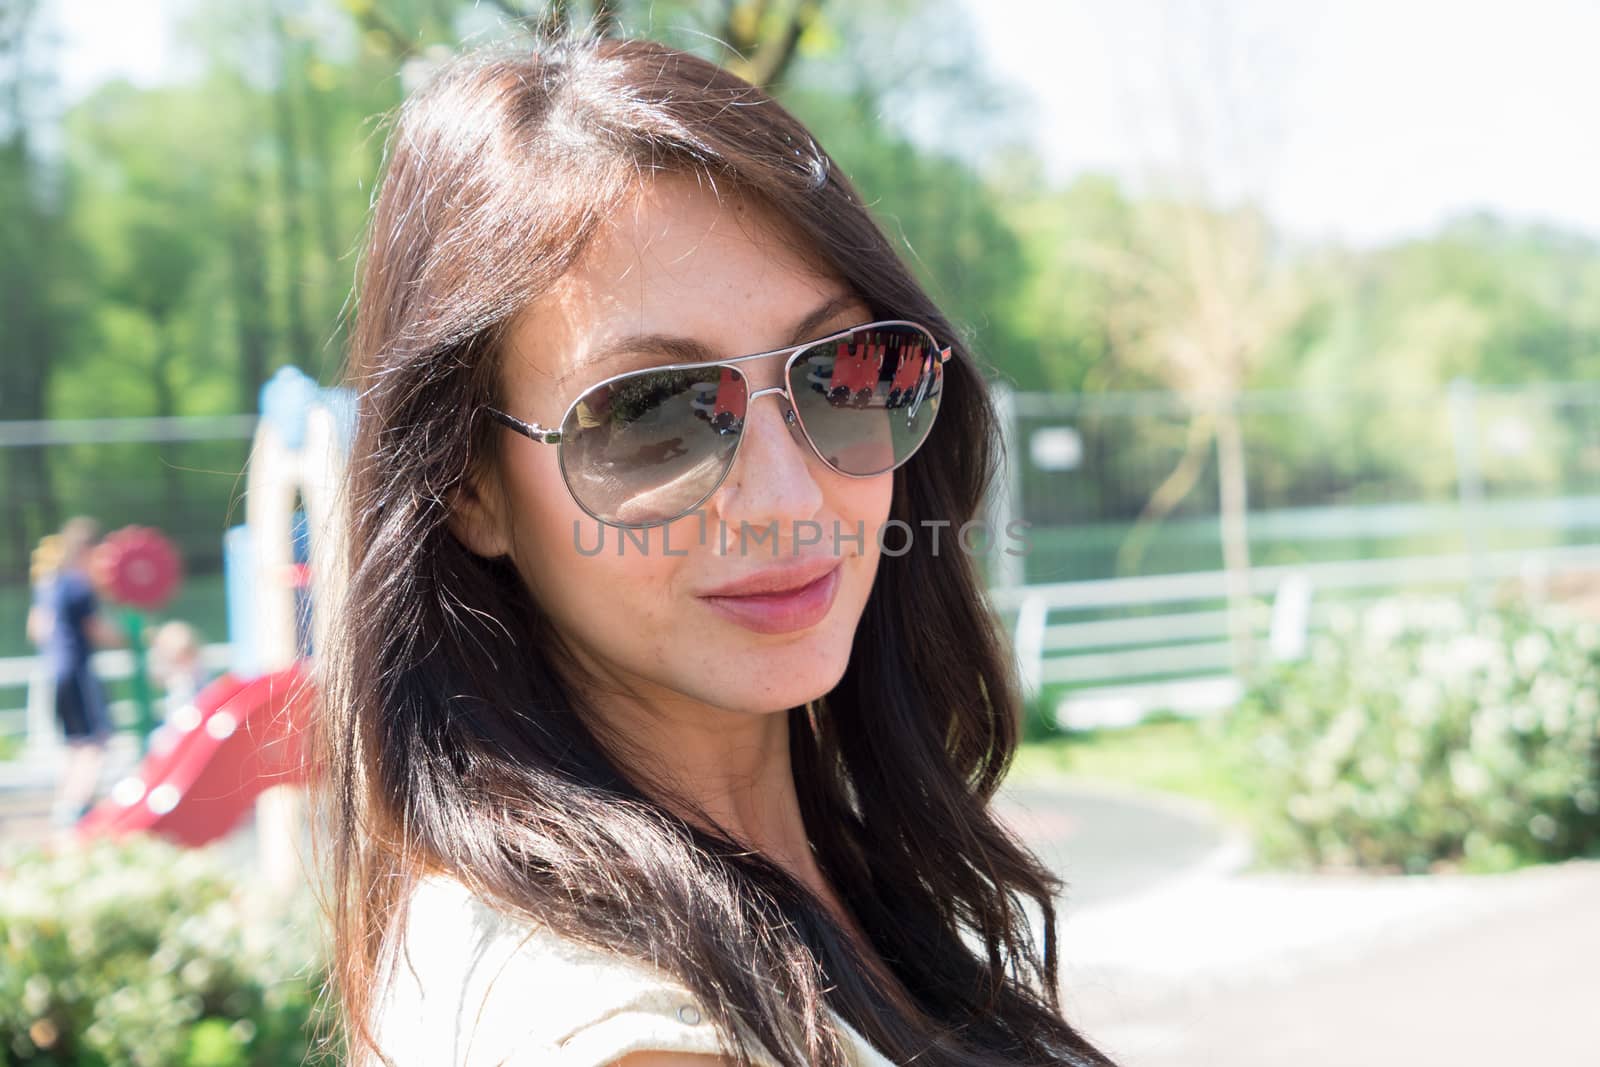 Young brunette woman with natural make-up, smiling with sunglasses in the park. Defocused blurry background.